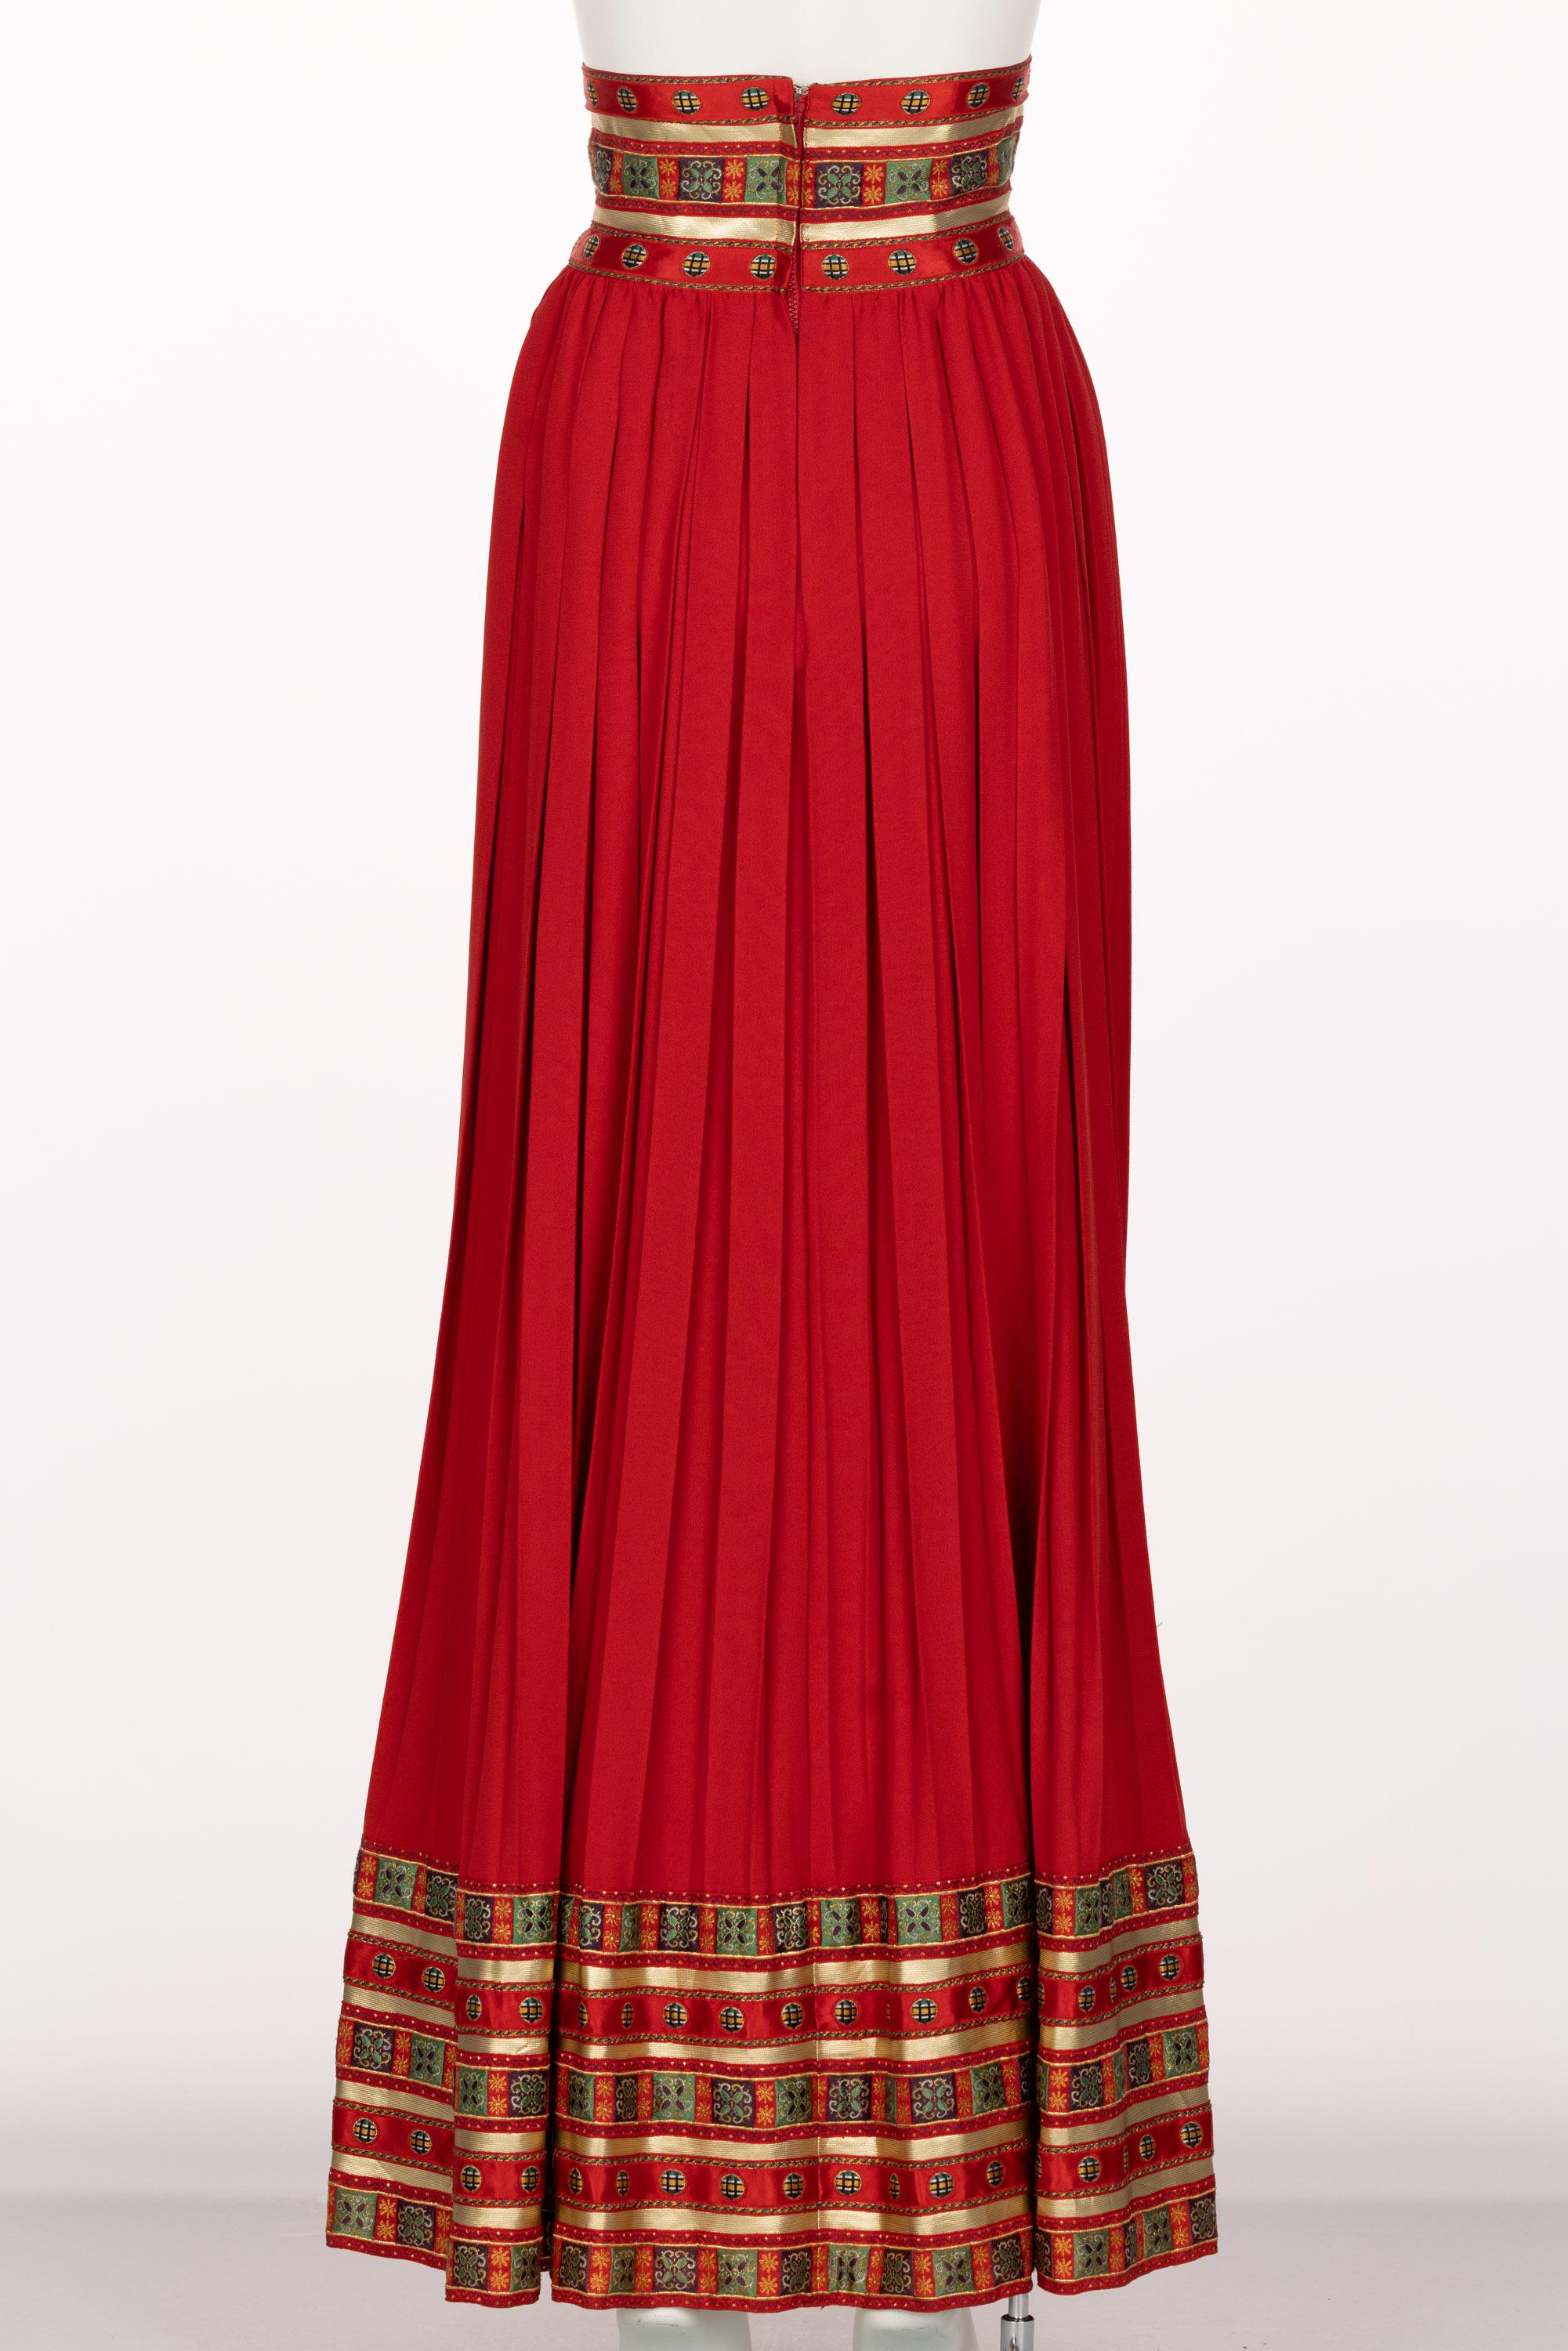 Women's Lanvin Jules-François Crahay Demi Couture Red Pleated Brocade Maxi Skirt 1970s For Sale